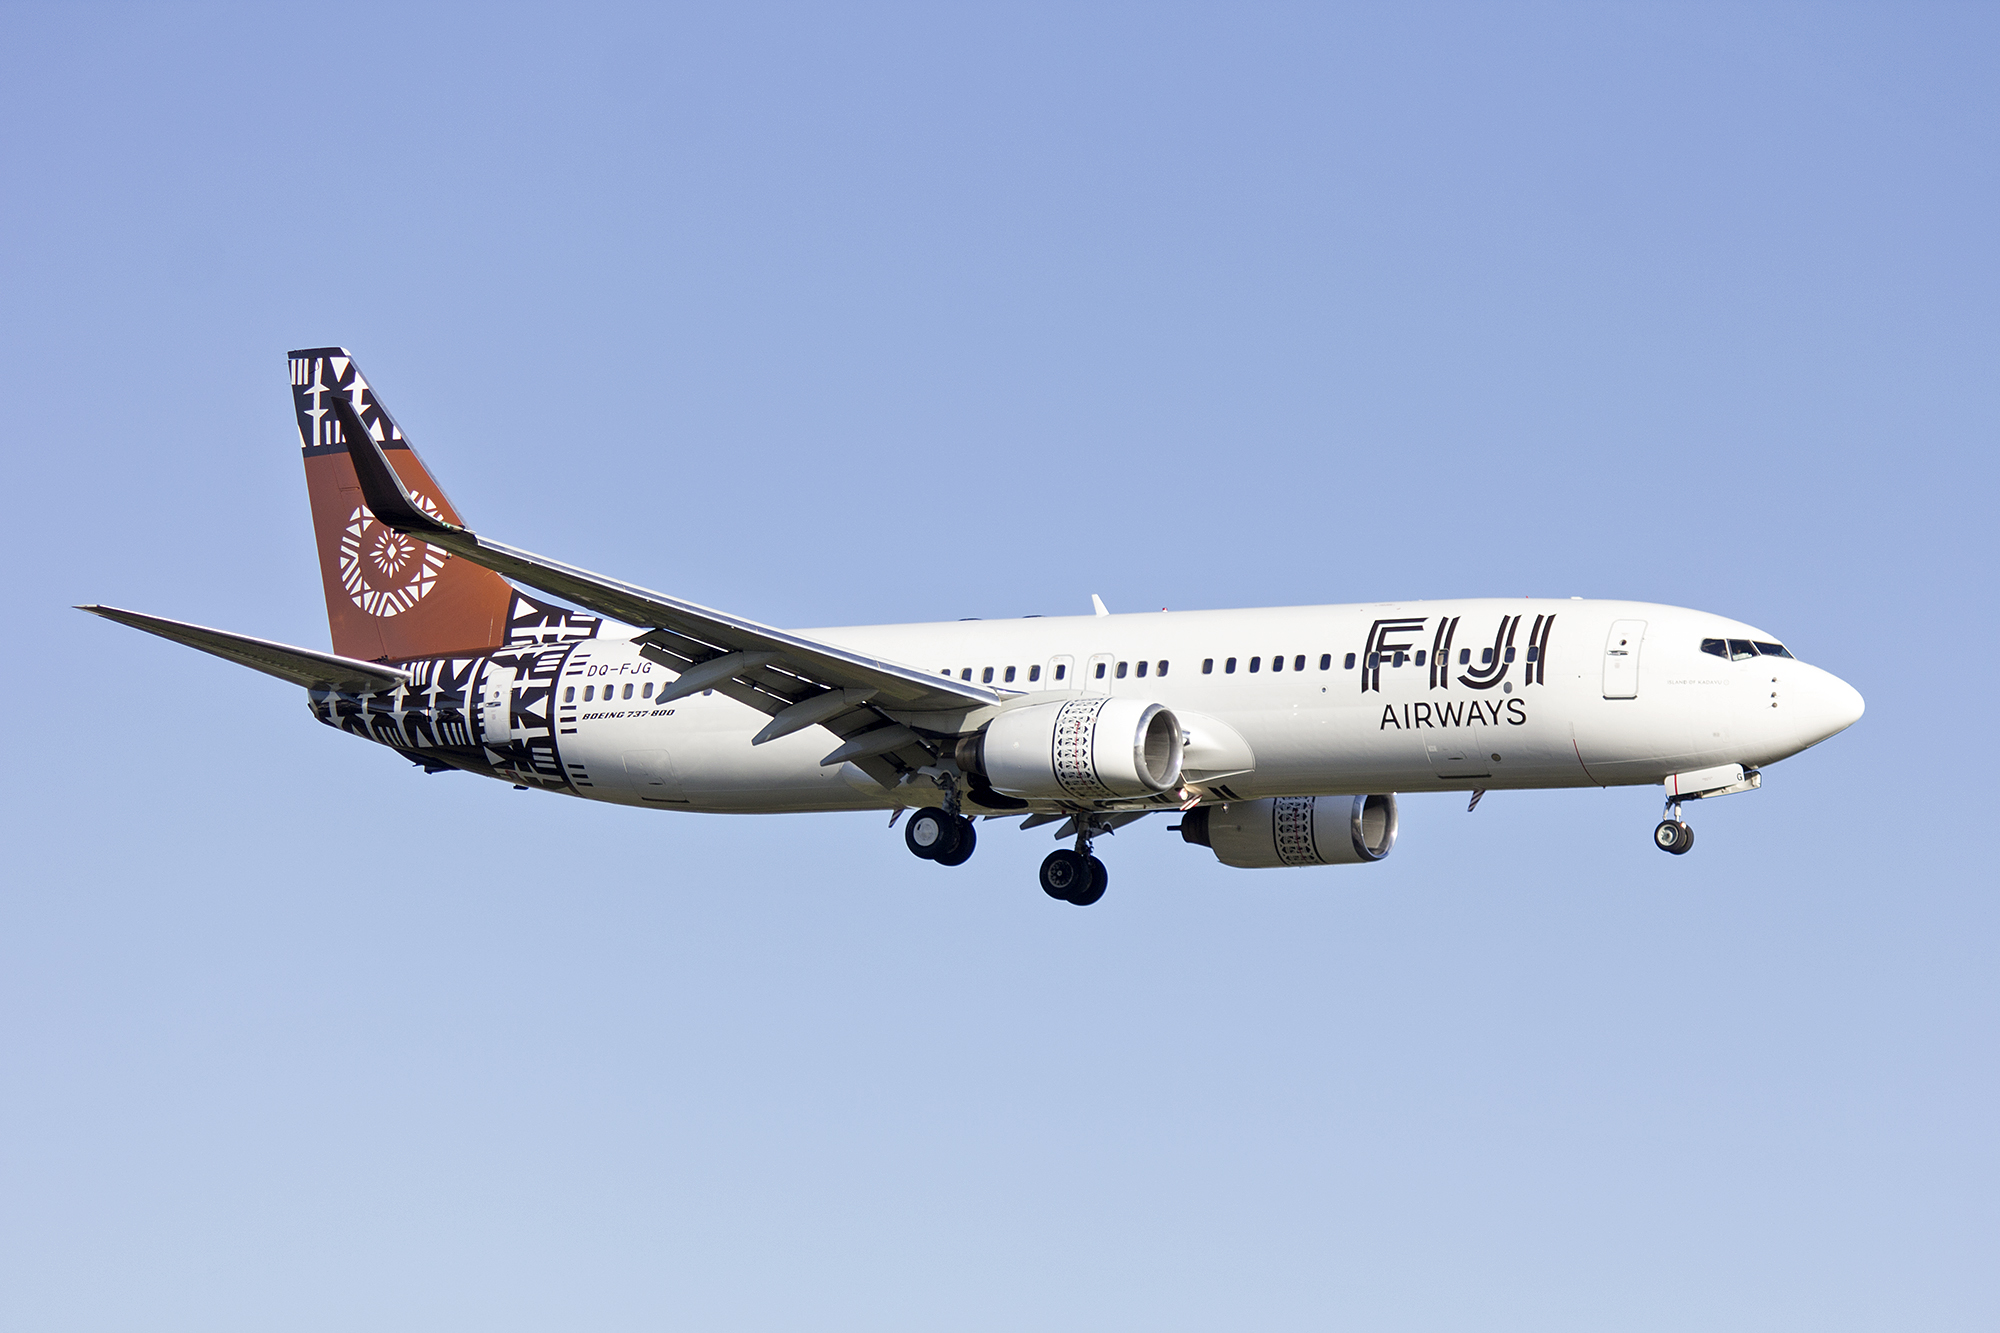 Fuji Airways (DQ-FJG) Boeing 737-8X2(WL) on approach to runway 25 at Sydney Airport